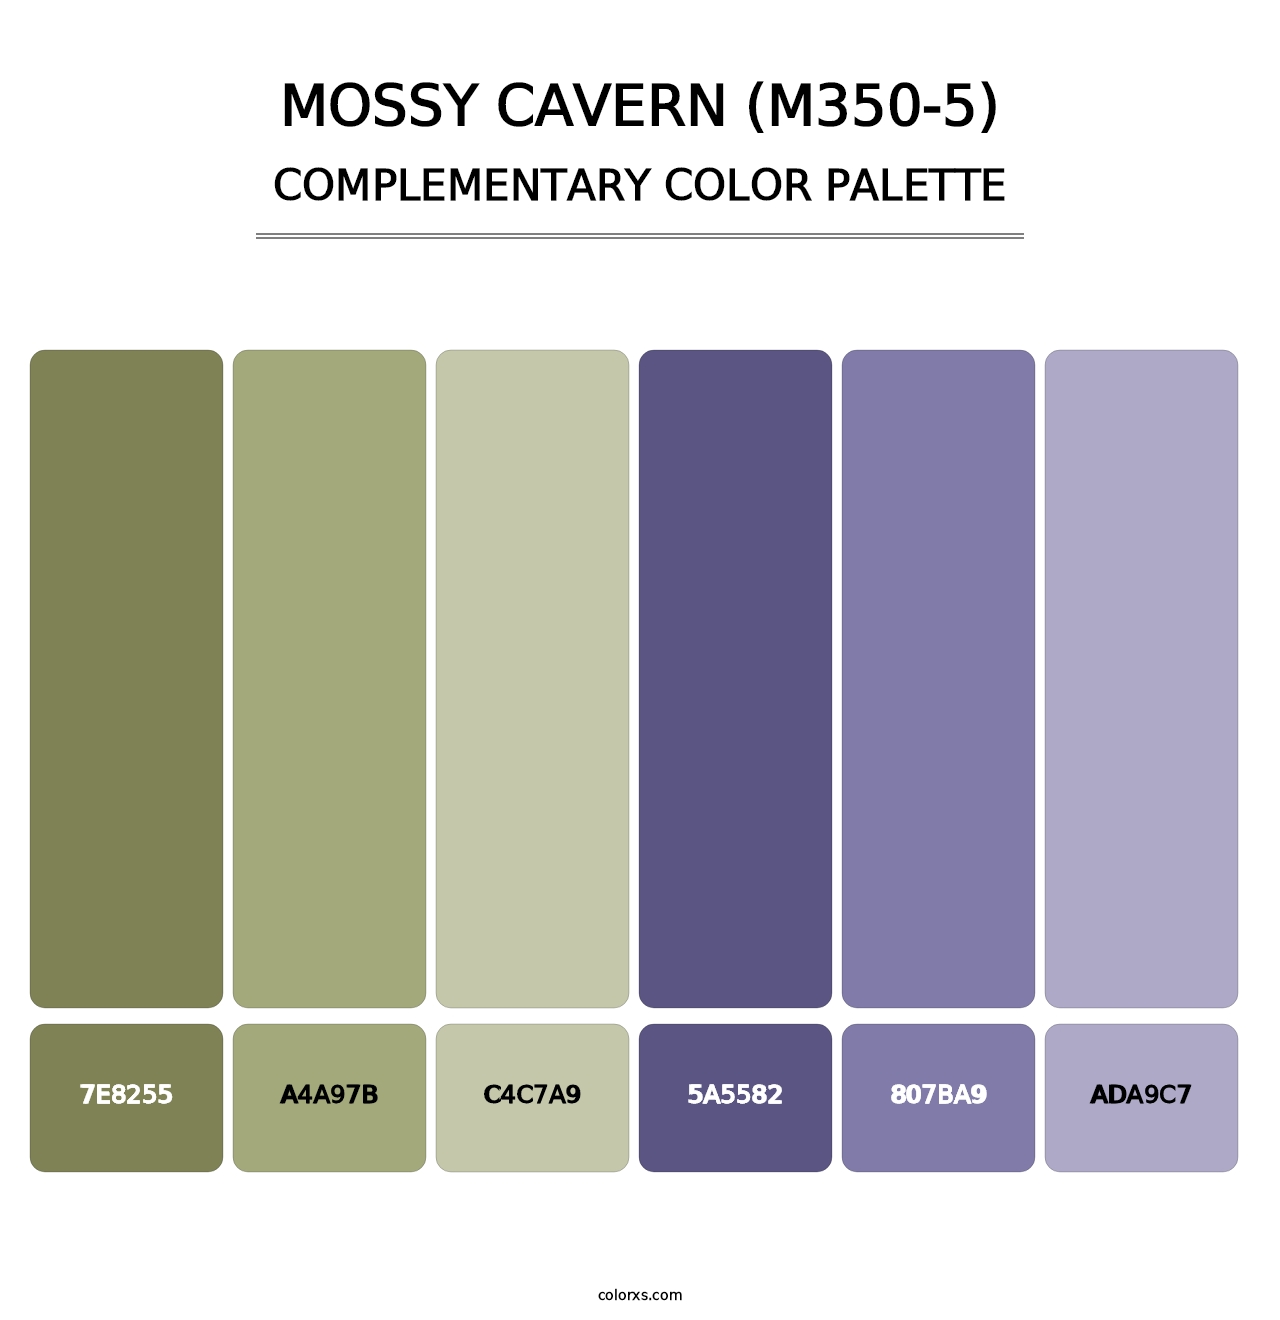 Mossy Cavern (M350-5) - Complementary Color Palette